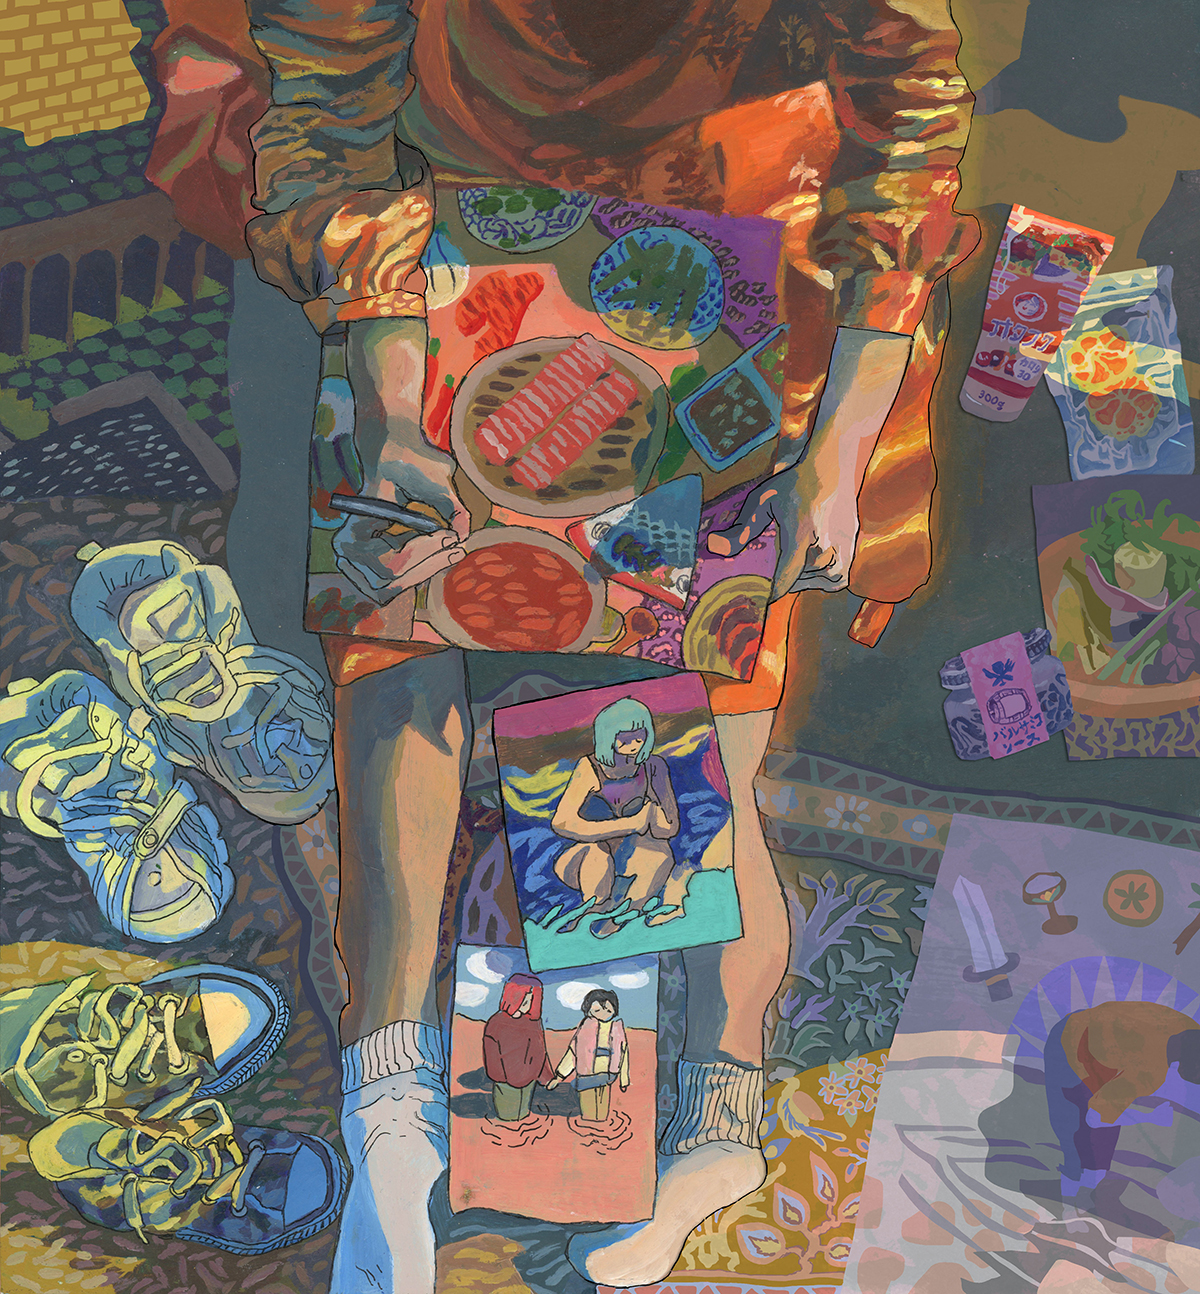 Painting of top down view of a woman's legs with a painting on her lap as she draws food, surrounded by shoes, paintings, art supplies, sitting on detailed blacket